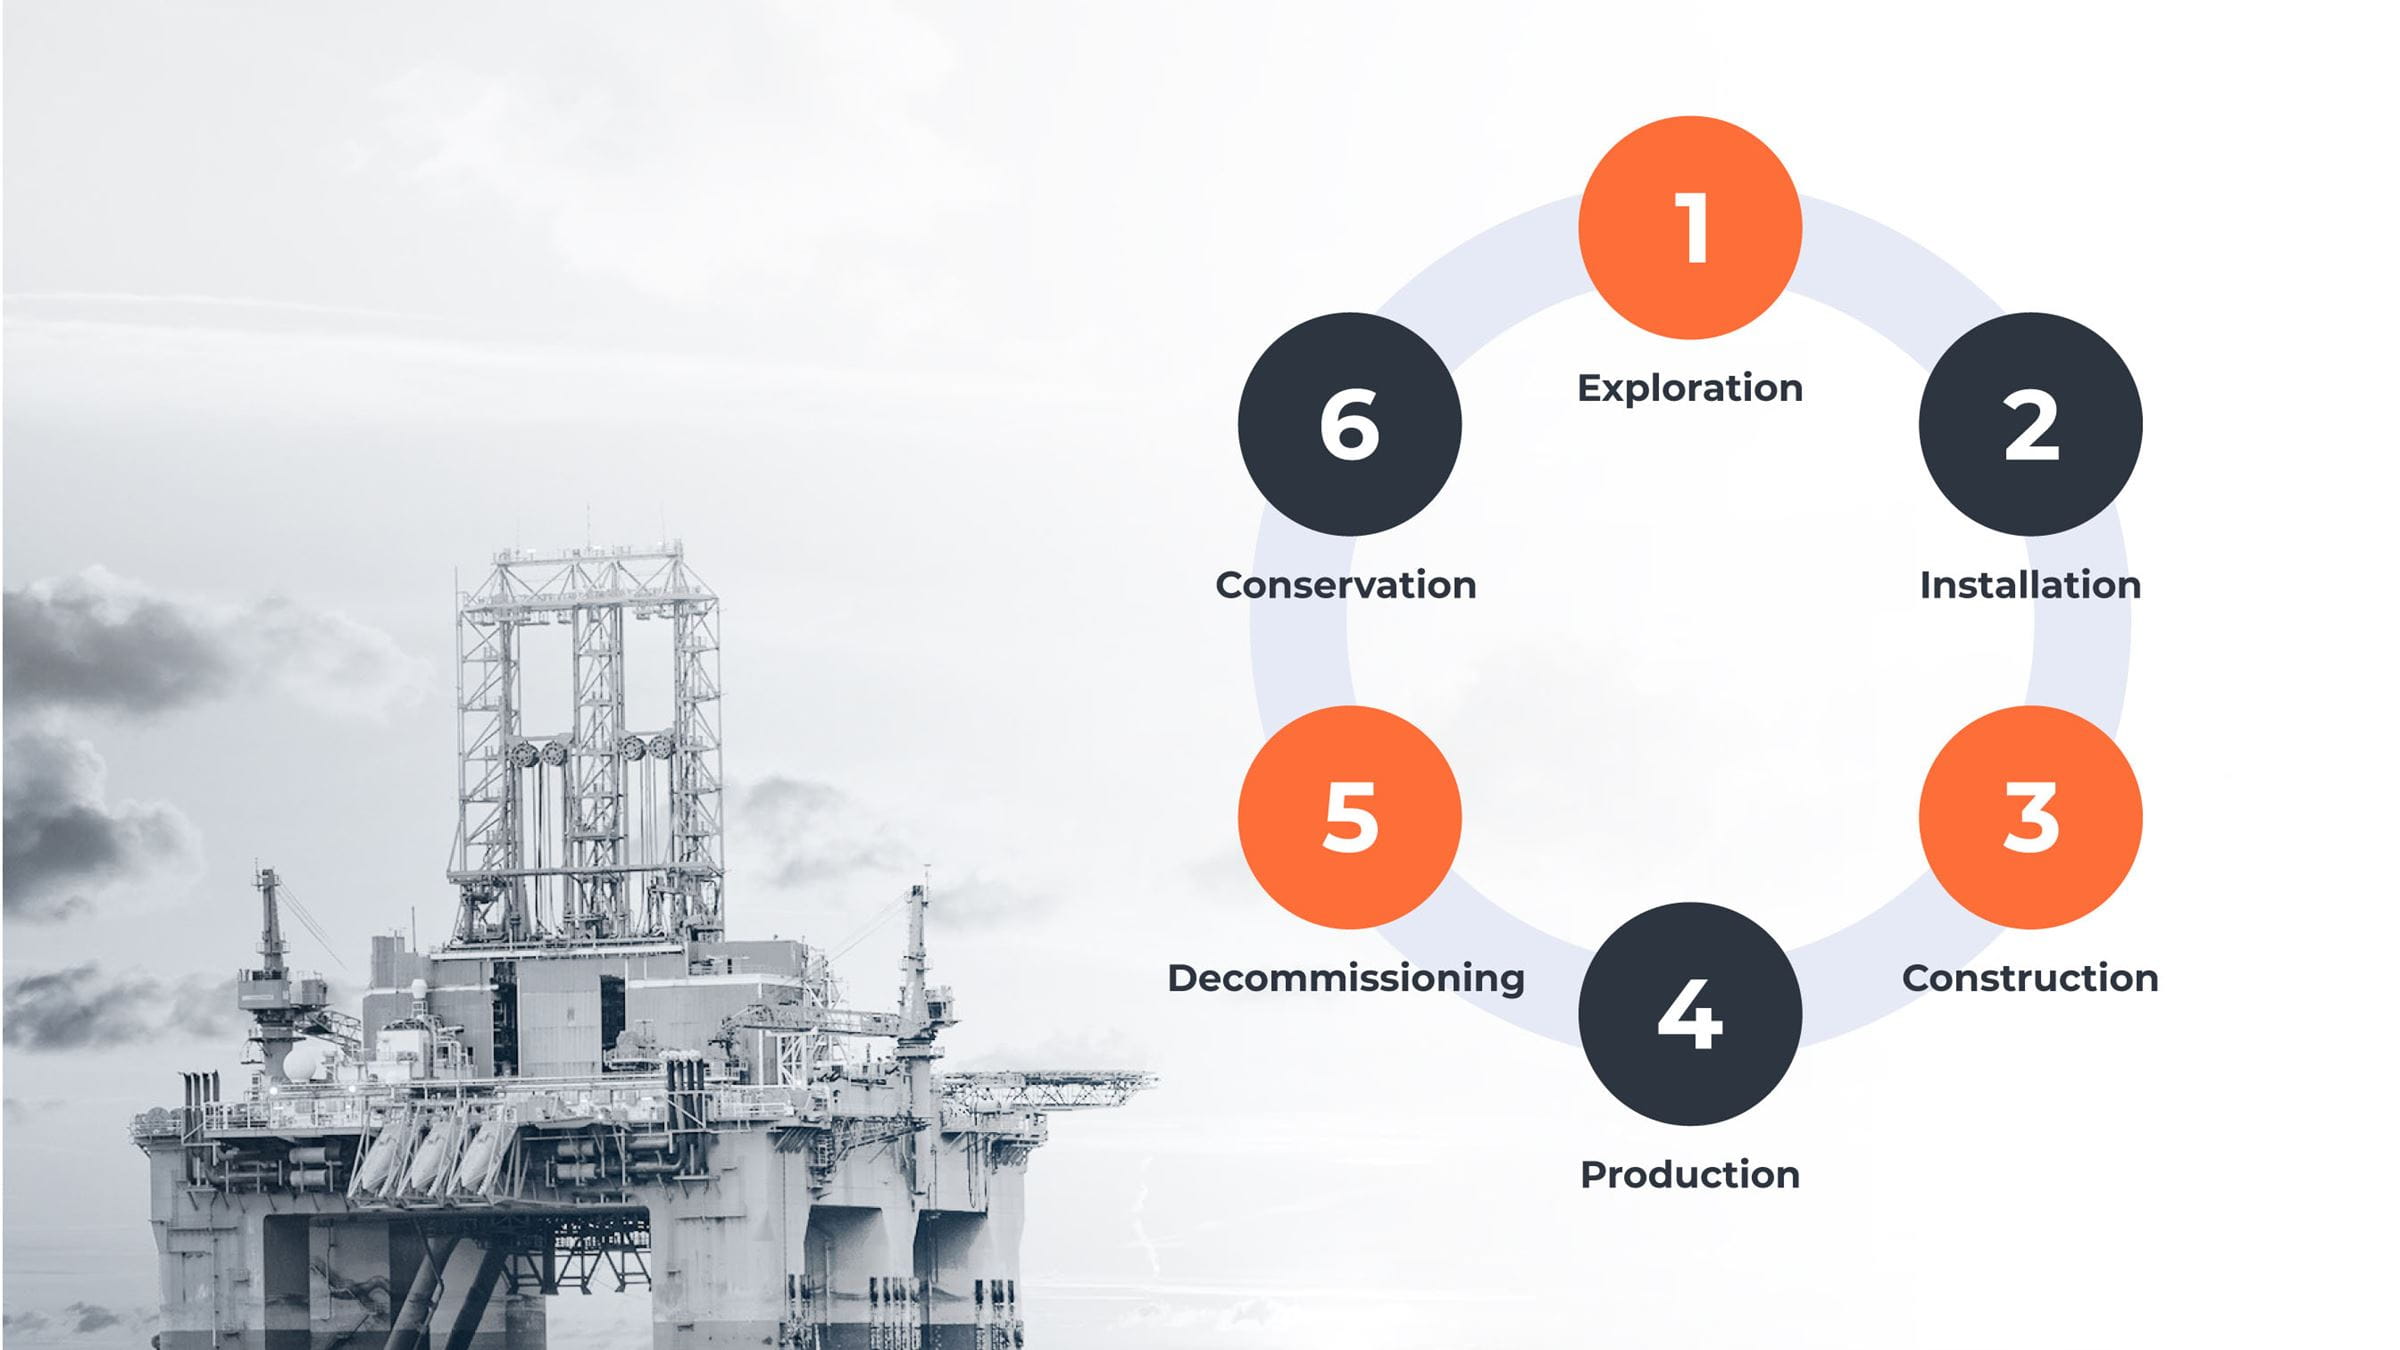 Lifecycle of an oil and gas platform